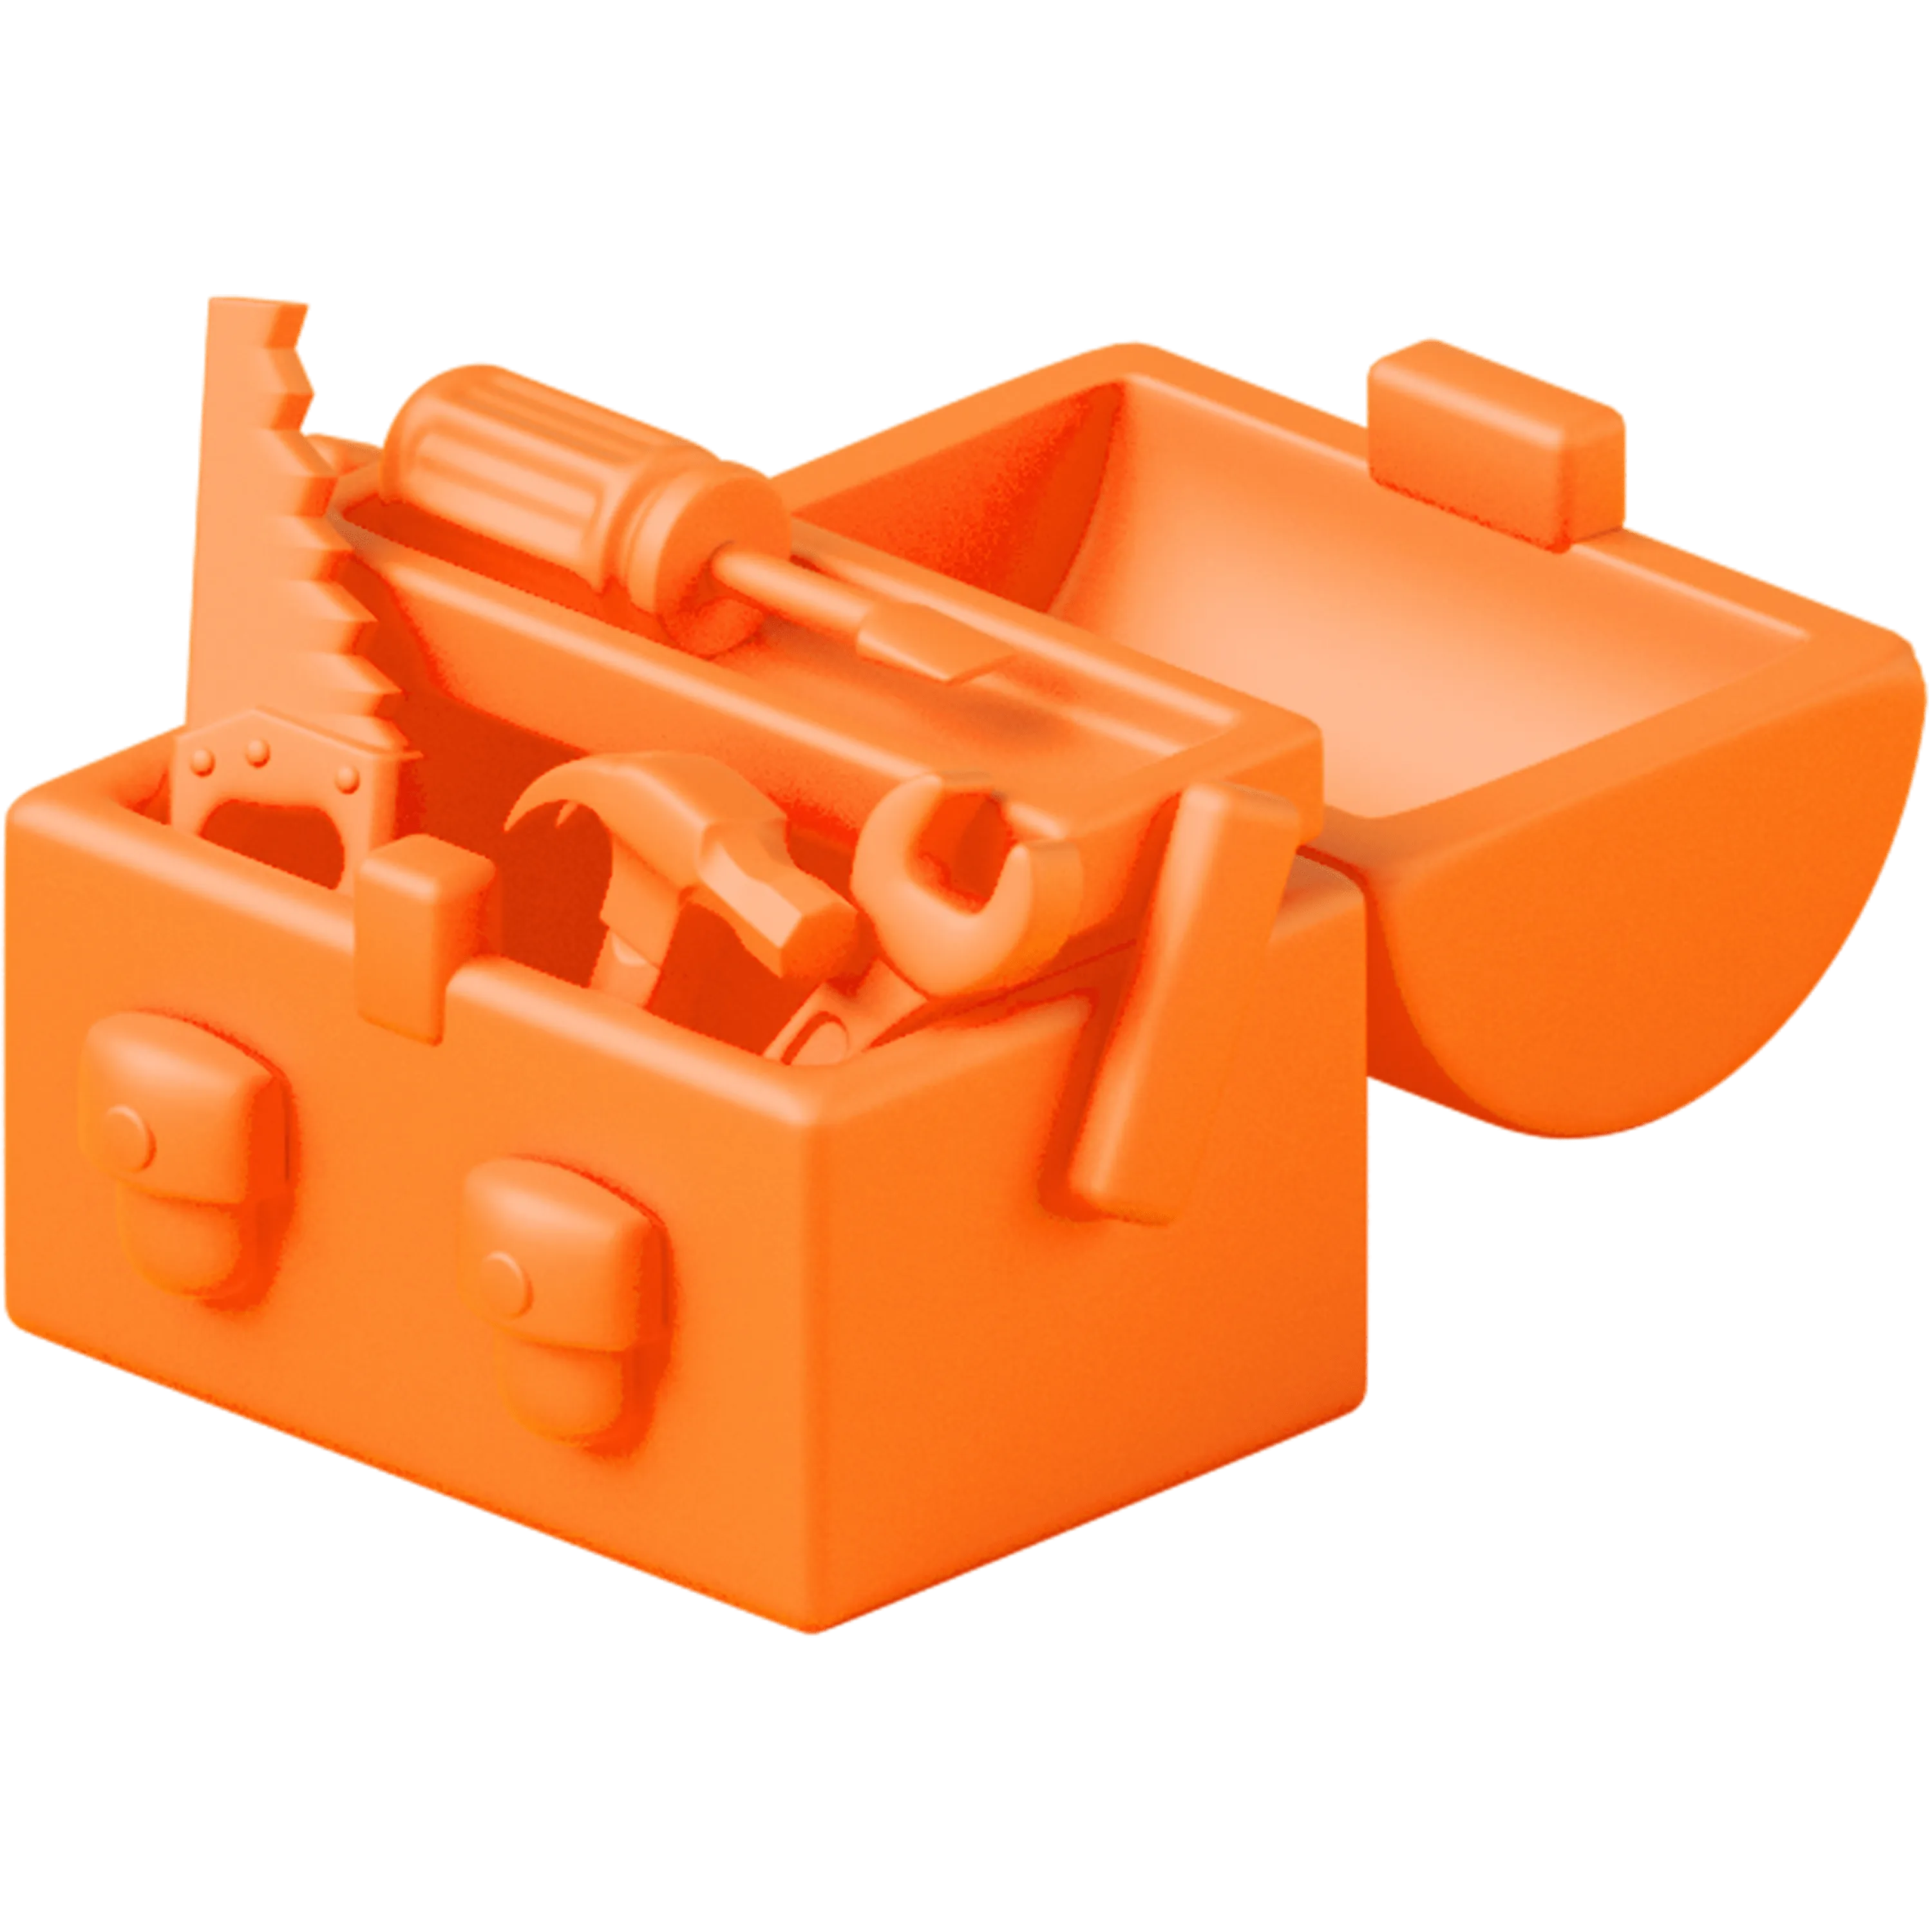 A 3D orange-red toolbox icon.